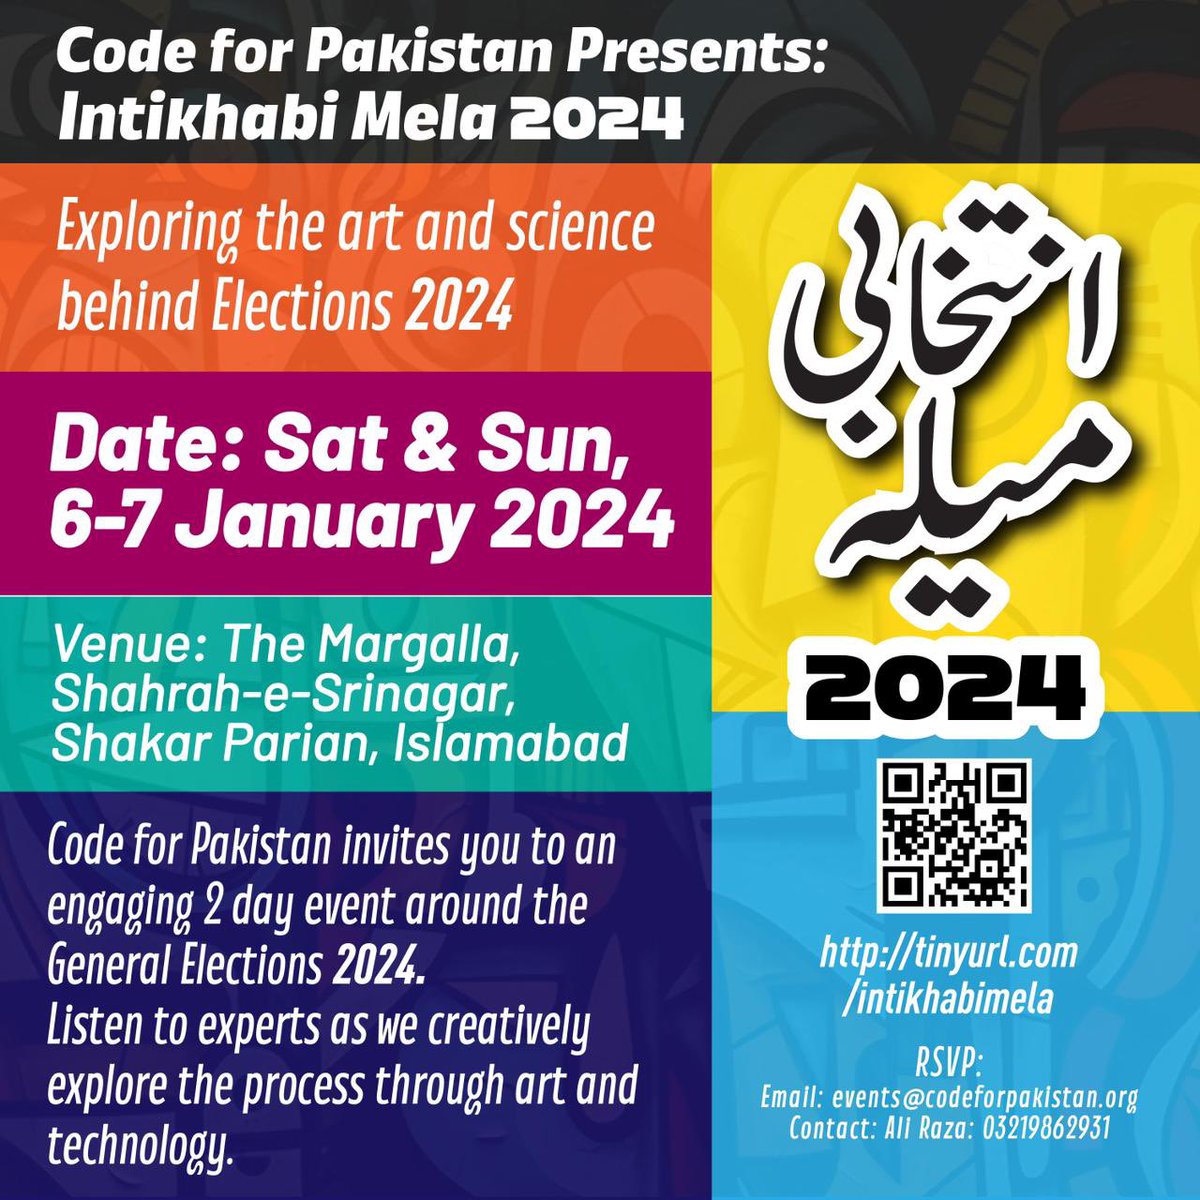 🚀 Join us at @CodeforPakistan’s Intikhabi Mela 2024! Dive into the art and science behind elections with a weekend full of fun, expert talks and creative showcases. Don't miss out!

🗓️ 6-7 January 2024
📍 The Margalla, Islamabad

RSVP now! 🔗 tinyurl.com/intikhabimela…